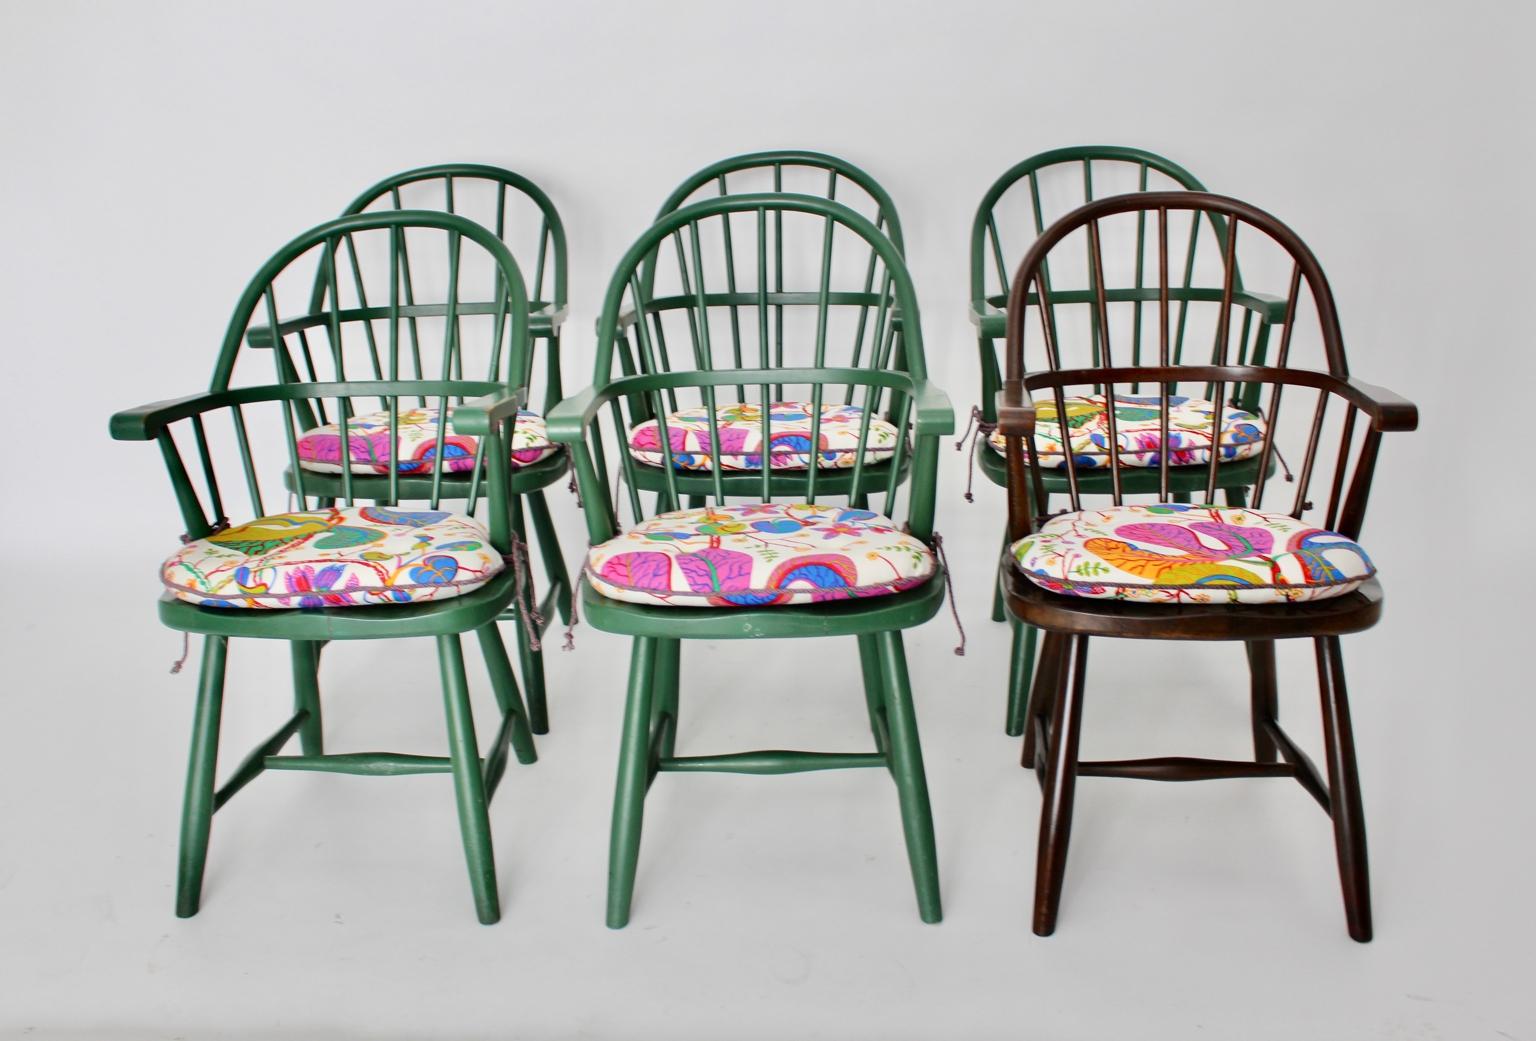 Art Deco outstanding and rare set of 6 Windsor chairs designed by Josef Frank for Haus & Garten and executed by Thonet, circa 1925. (Labeled underneath)
The set consists of 5 green Windsor chairs and 1 brown Windsor chair.
These  art deco chairs